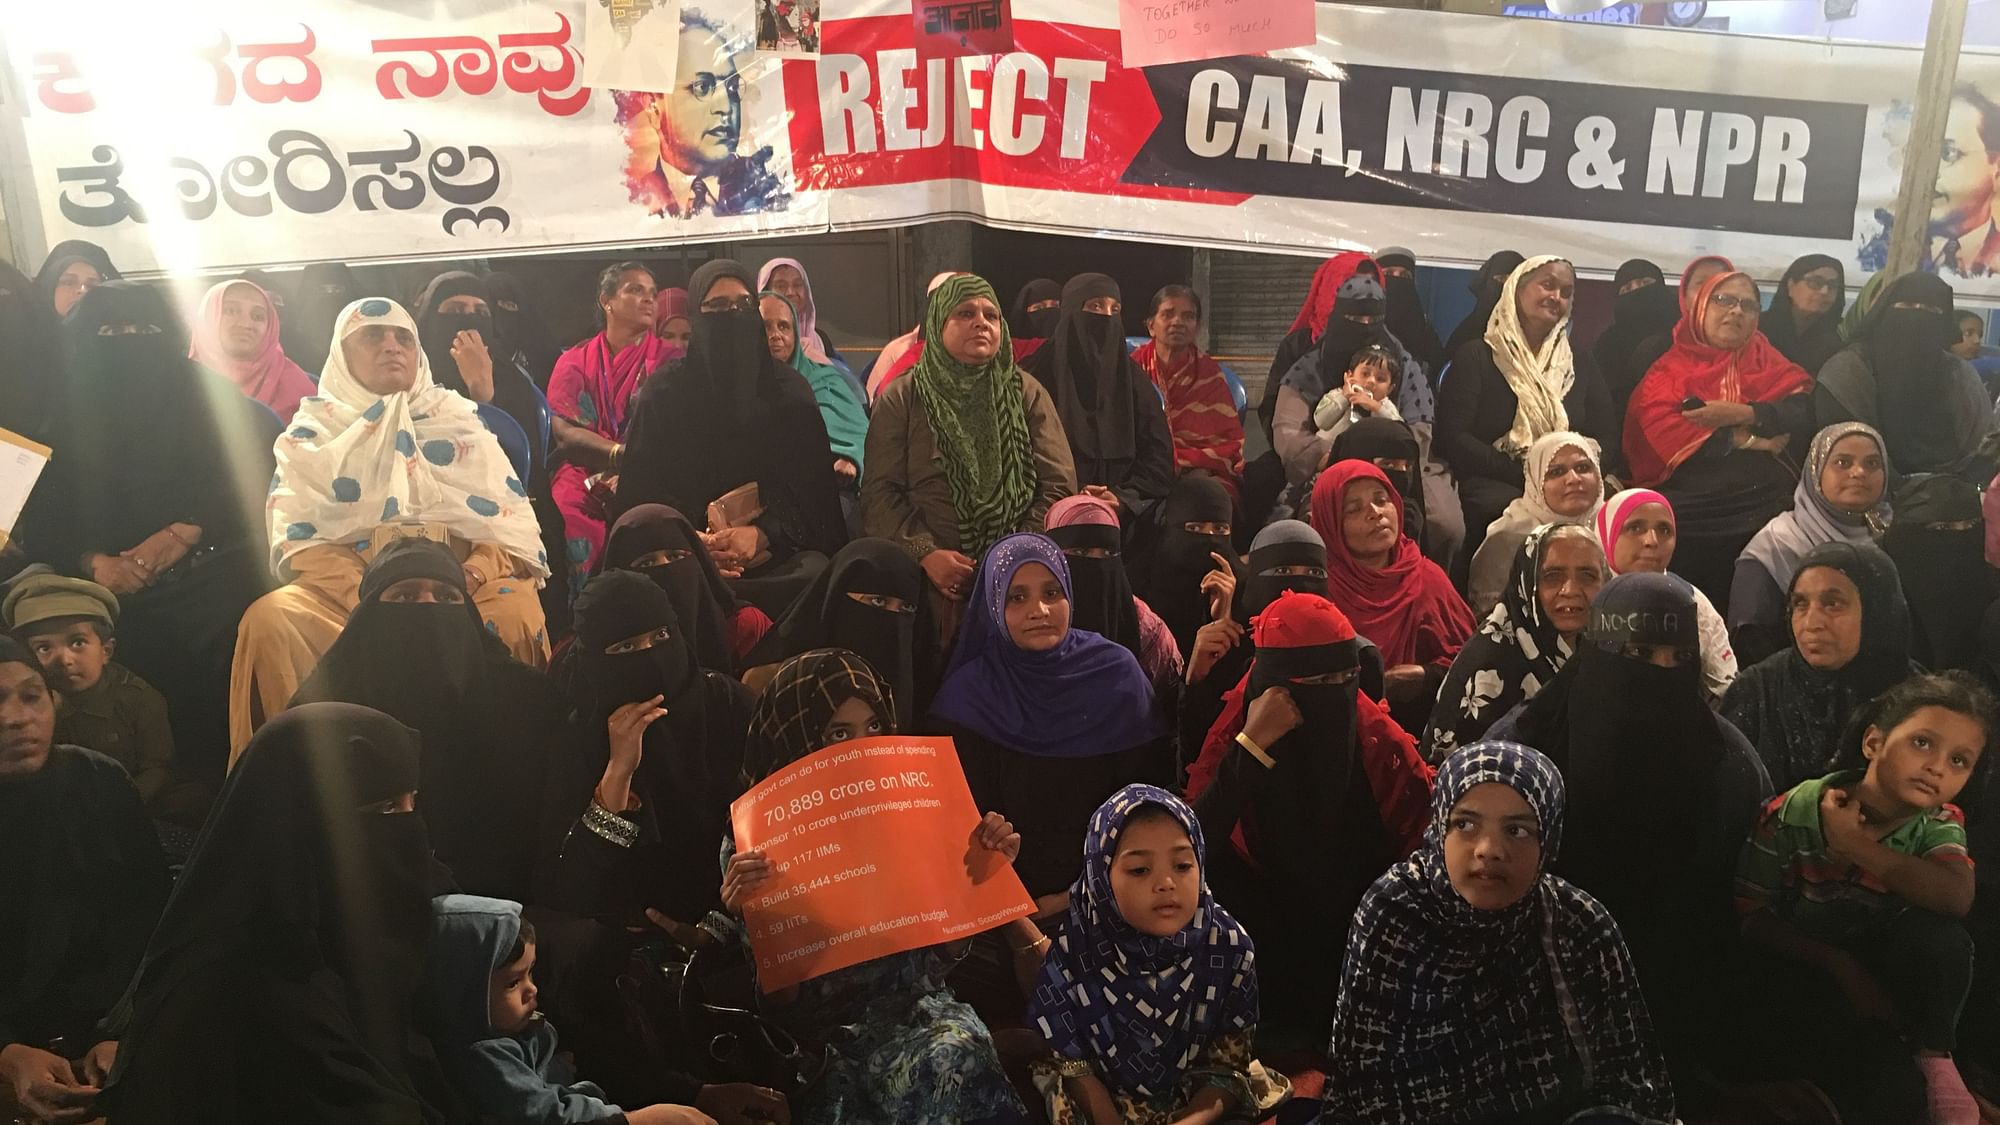 From the evening of 8 February, women in Bengaluru have been sitting on an indefinite protest against CAA, NRC demanding <i>azaadi</i> from such laws and to assert their rights as citizens.